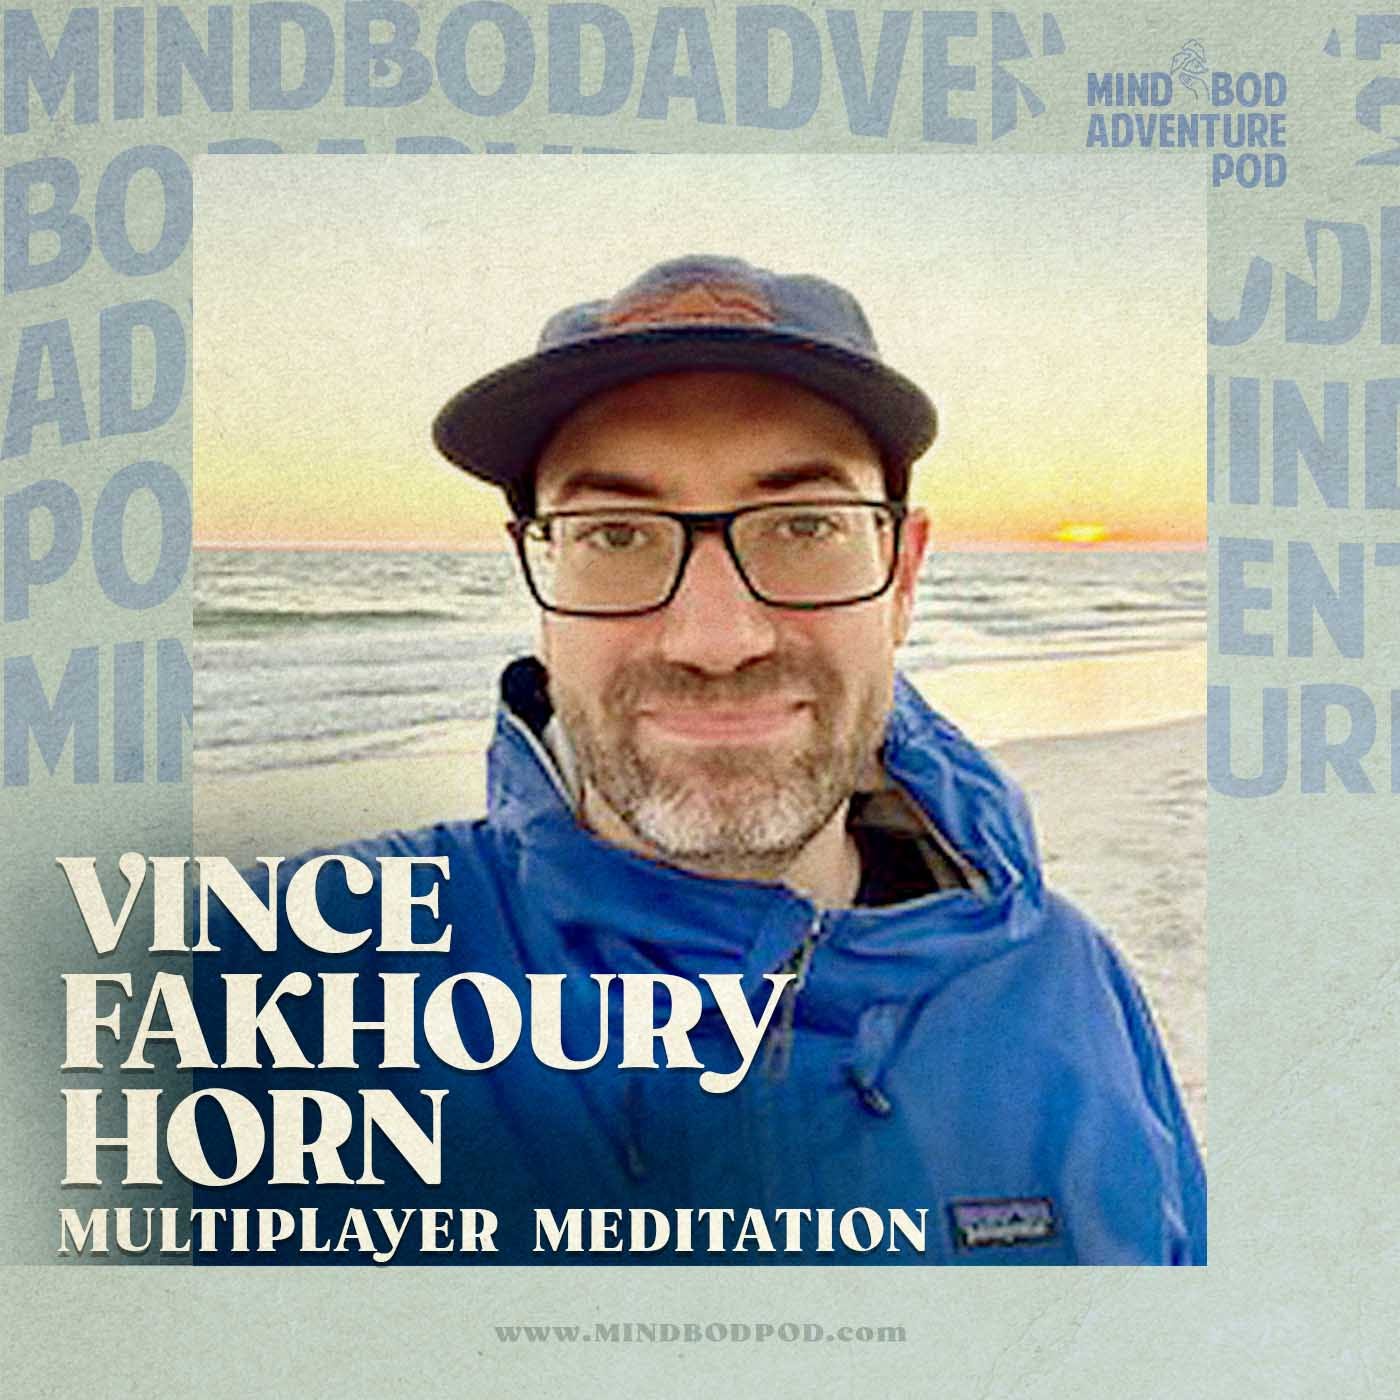 Multiplayer Meditation with Vince Fakhoury Horn